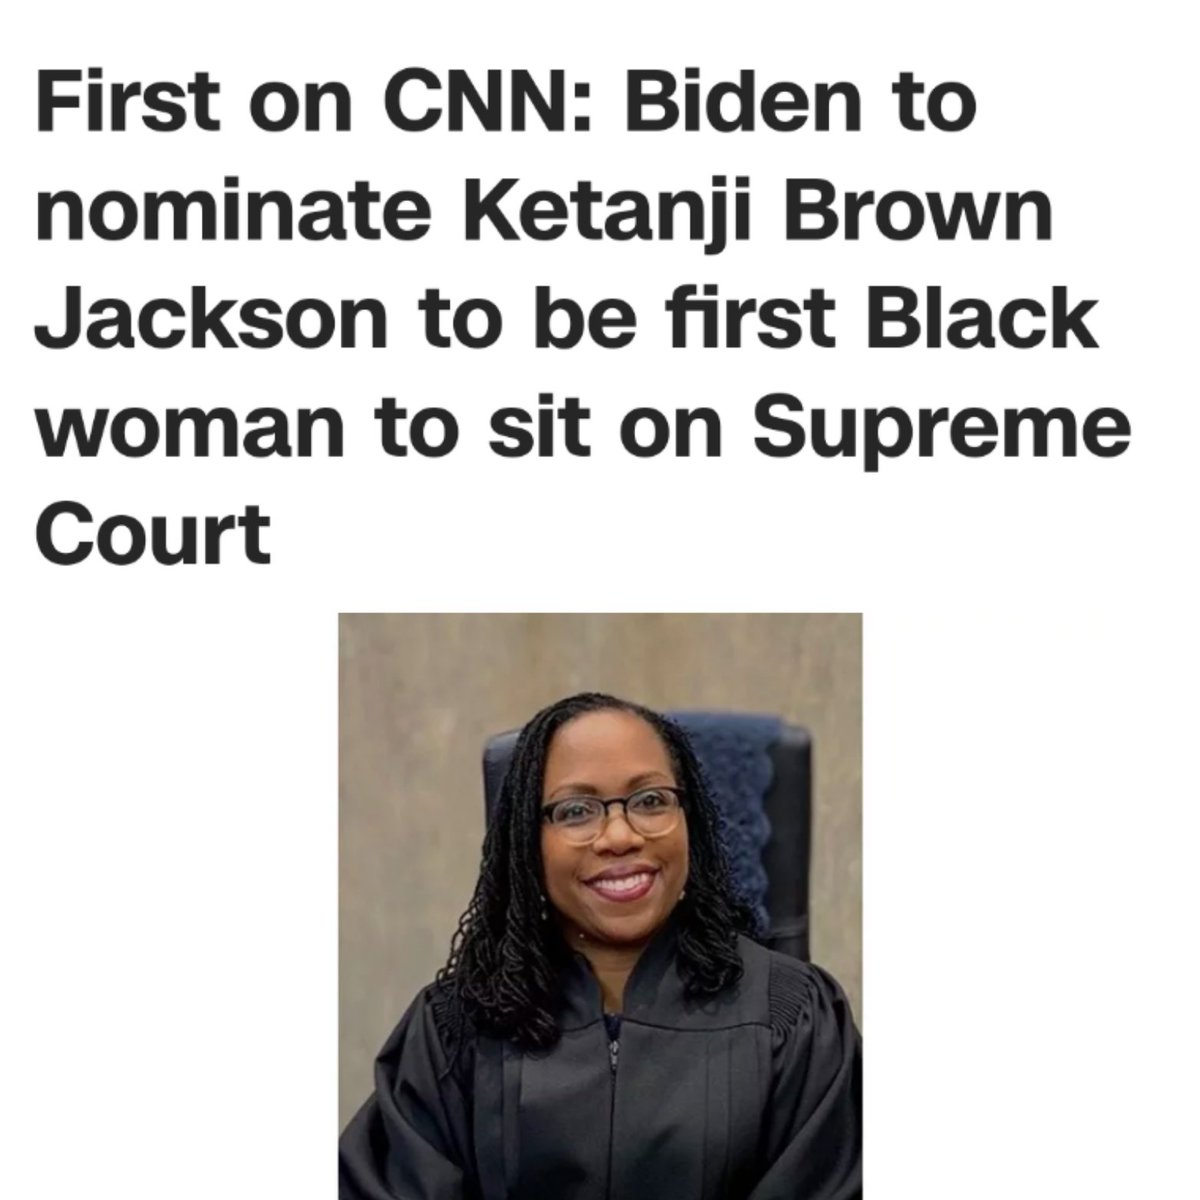 Happy #blackhistorymonth‼️ If confirmed, the 51-year-old Ketanji Jackson would be the first Black Woman on the court and also one of the youngest justices. She would bring a wide range of experiences not only as a public defender but also a federal district judge and a member